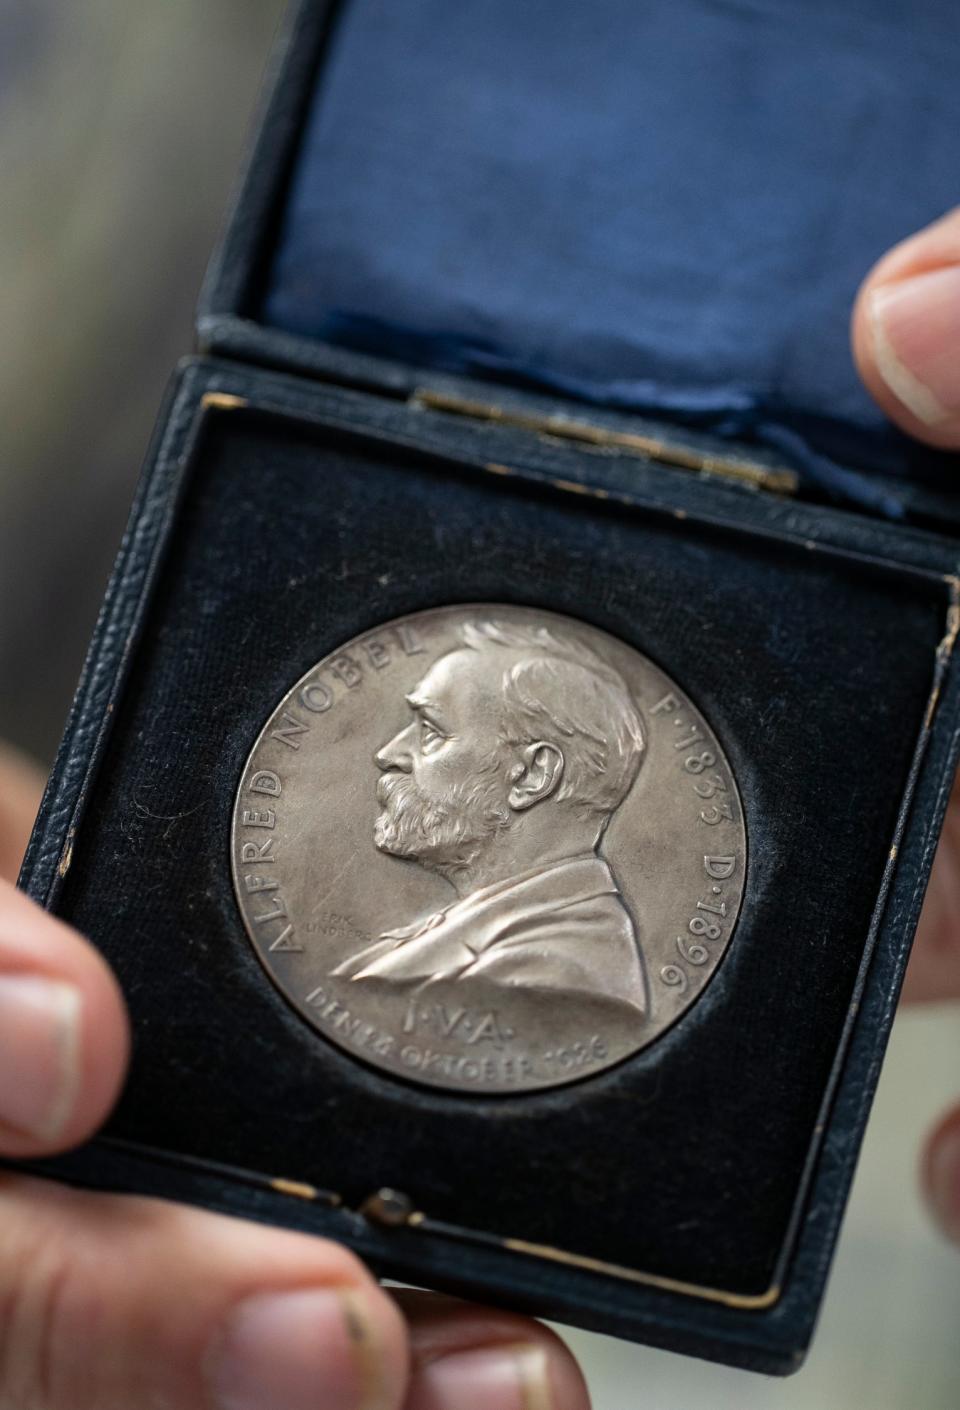 Gary E. Lewis displays a 1926 Nobel Award in chemistry judge's silver medal. Lewis, an expert numismatist, and former president of the Cape Coral and Fort Myers coin clubs, makes presentations to organizations and offers appraisal services.